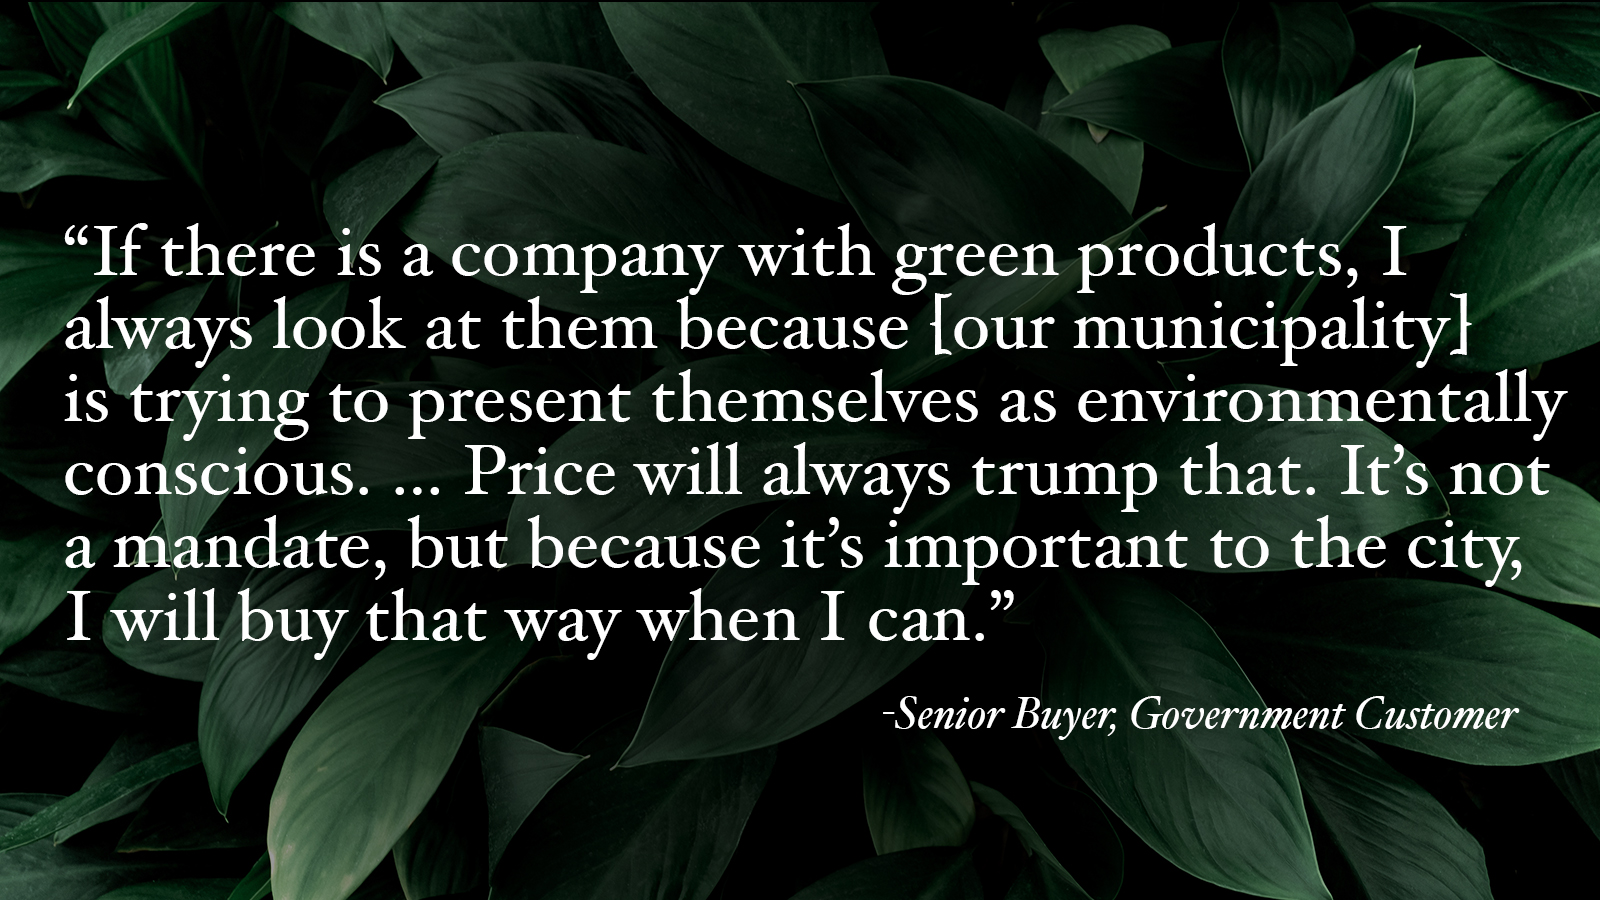 Quote from government buyer about sustainability